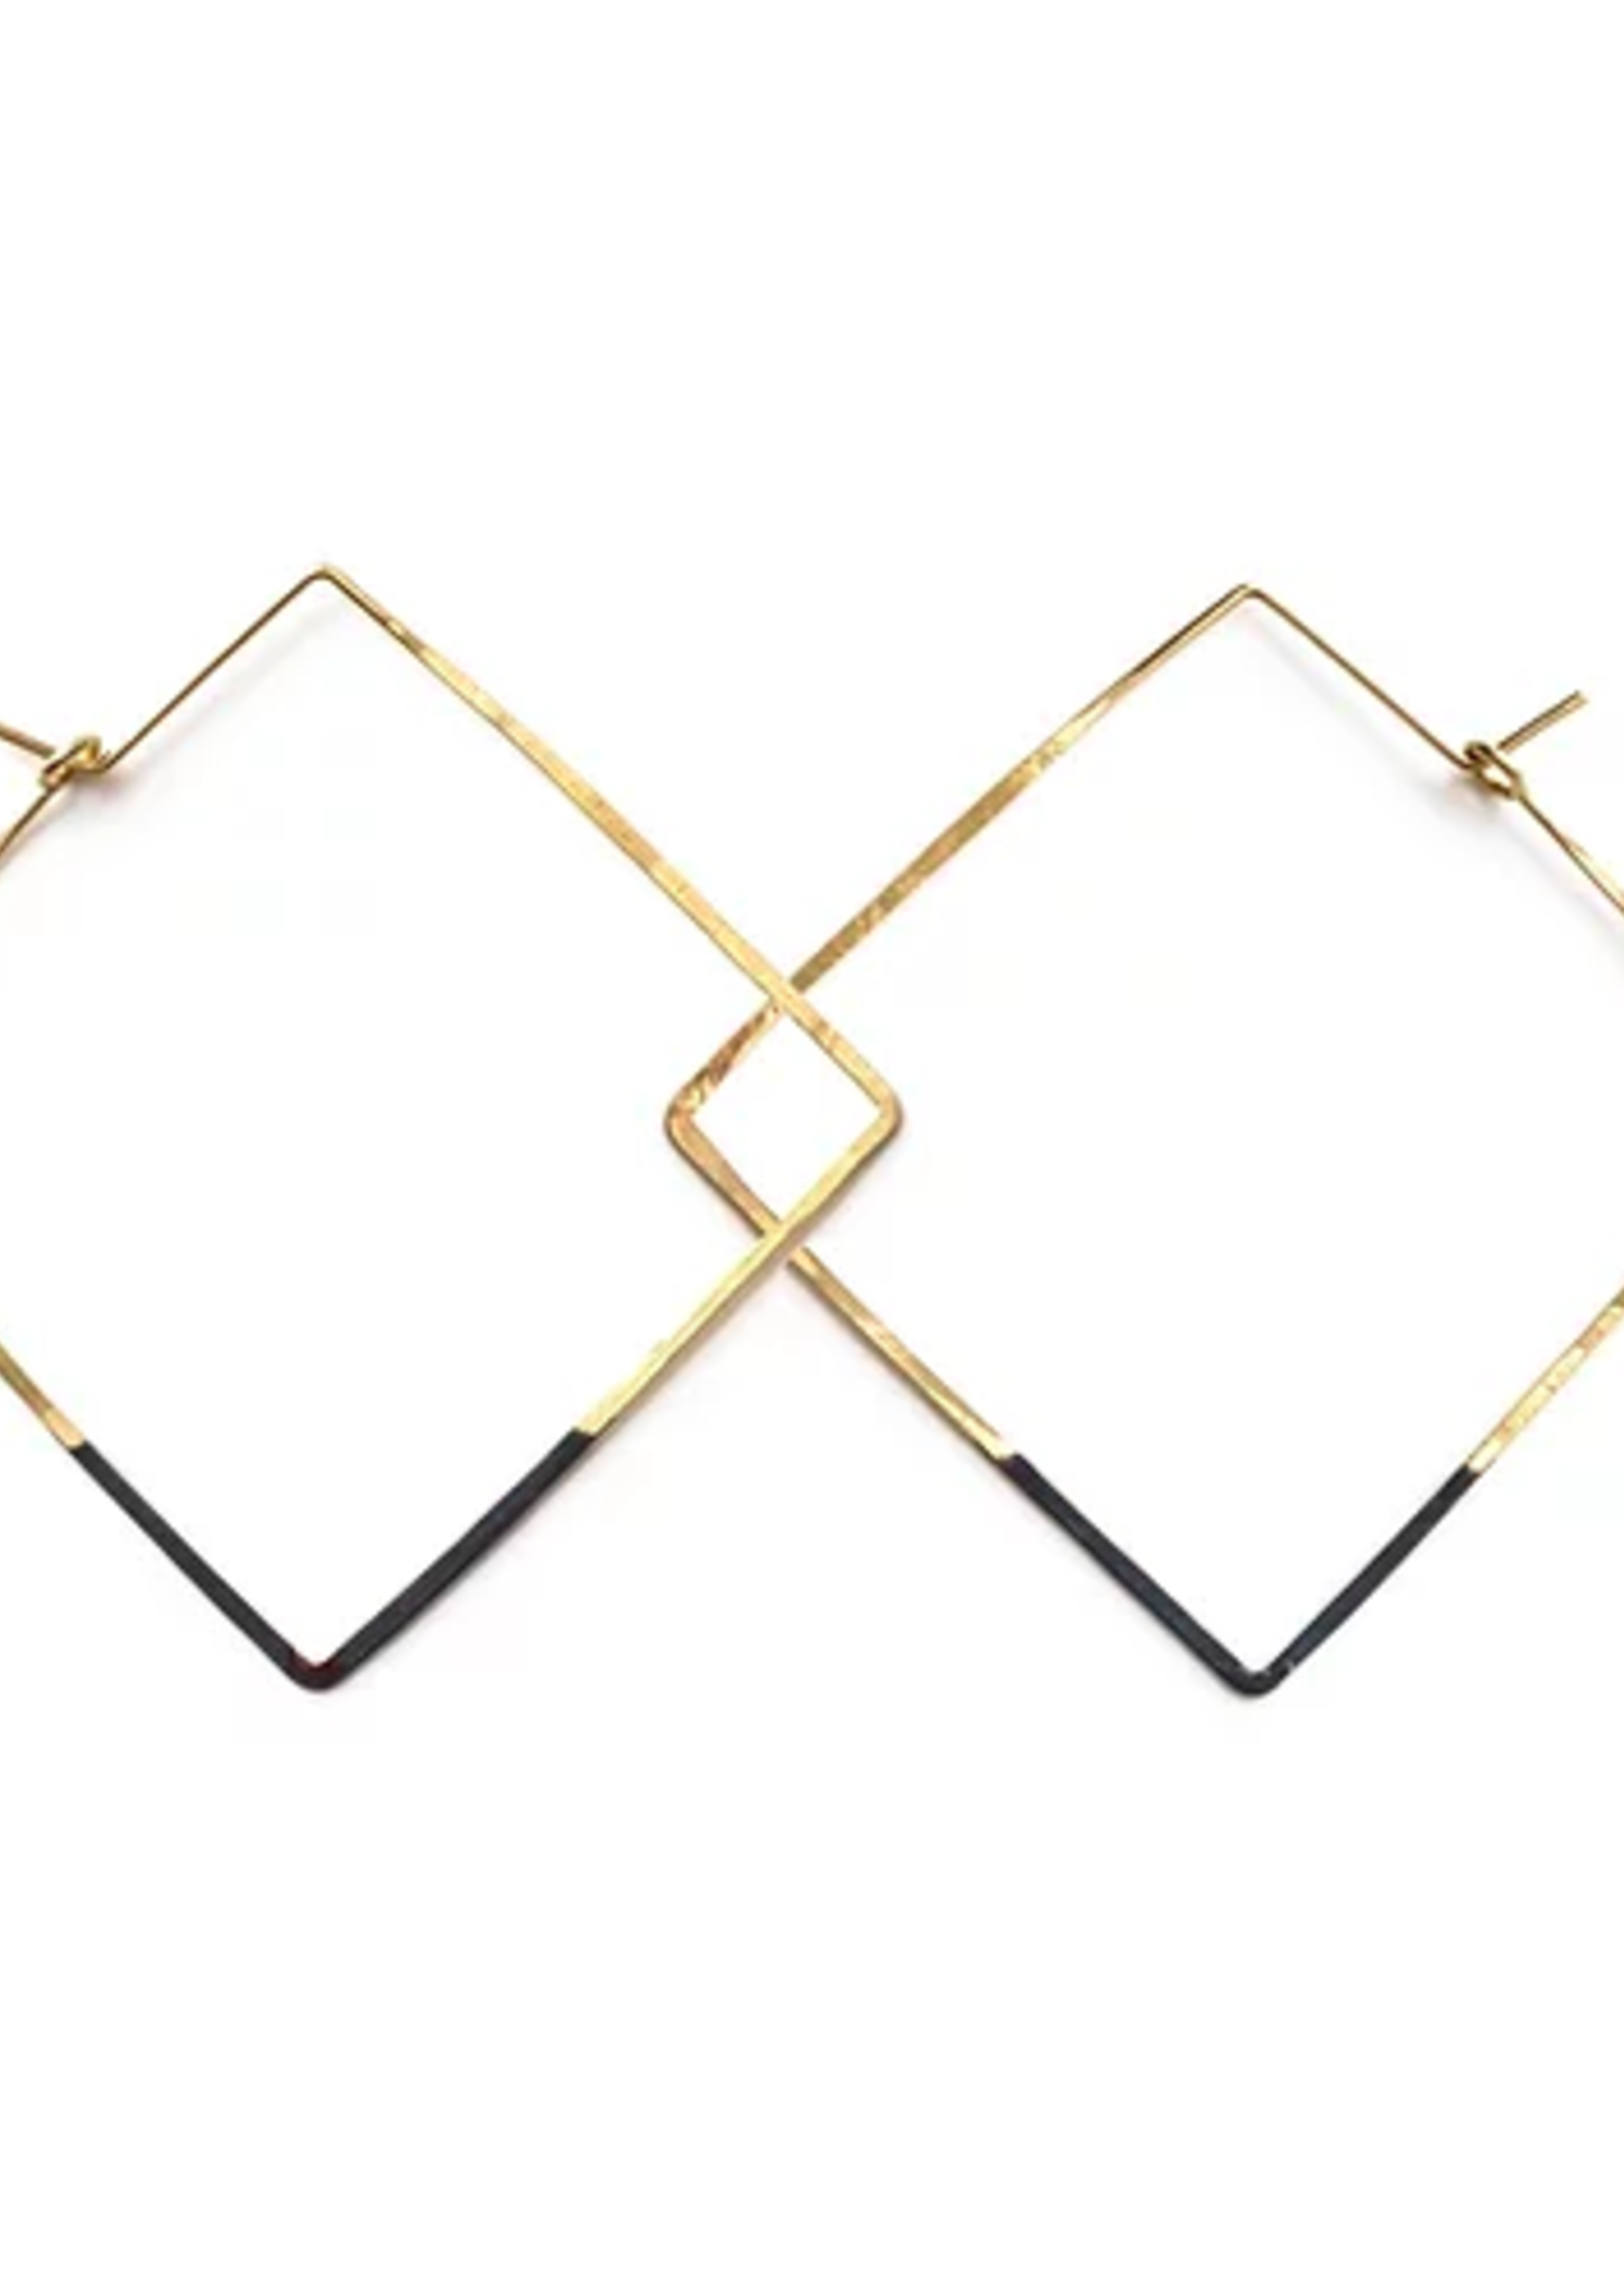 *Patina Dipped Square Hoops